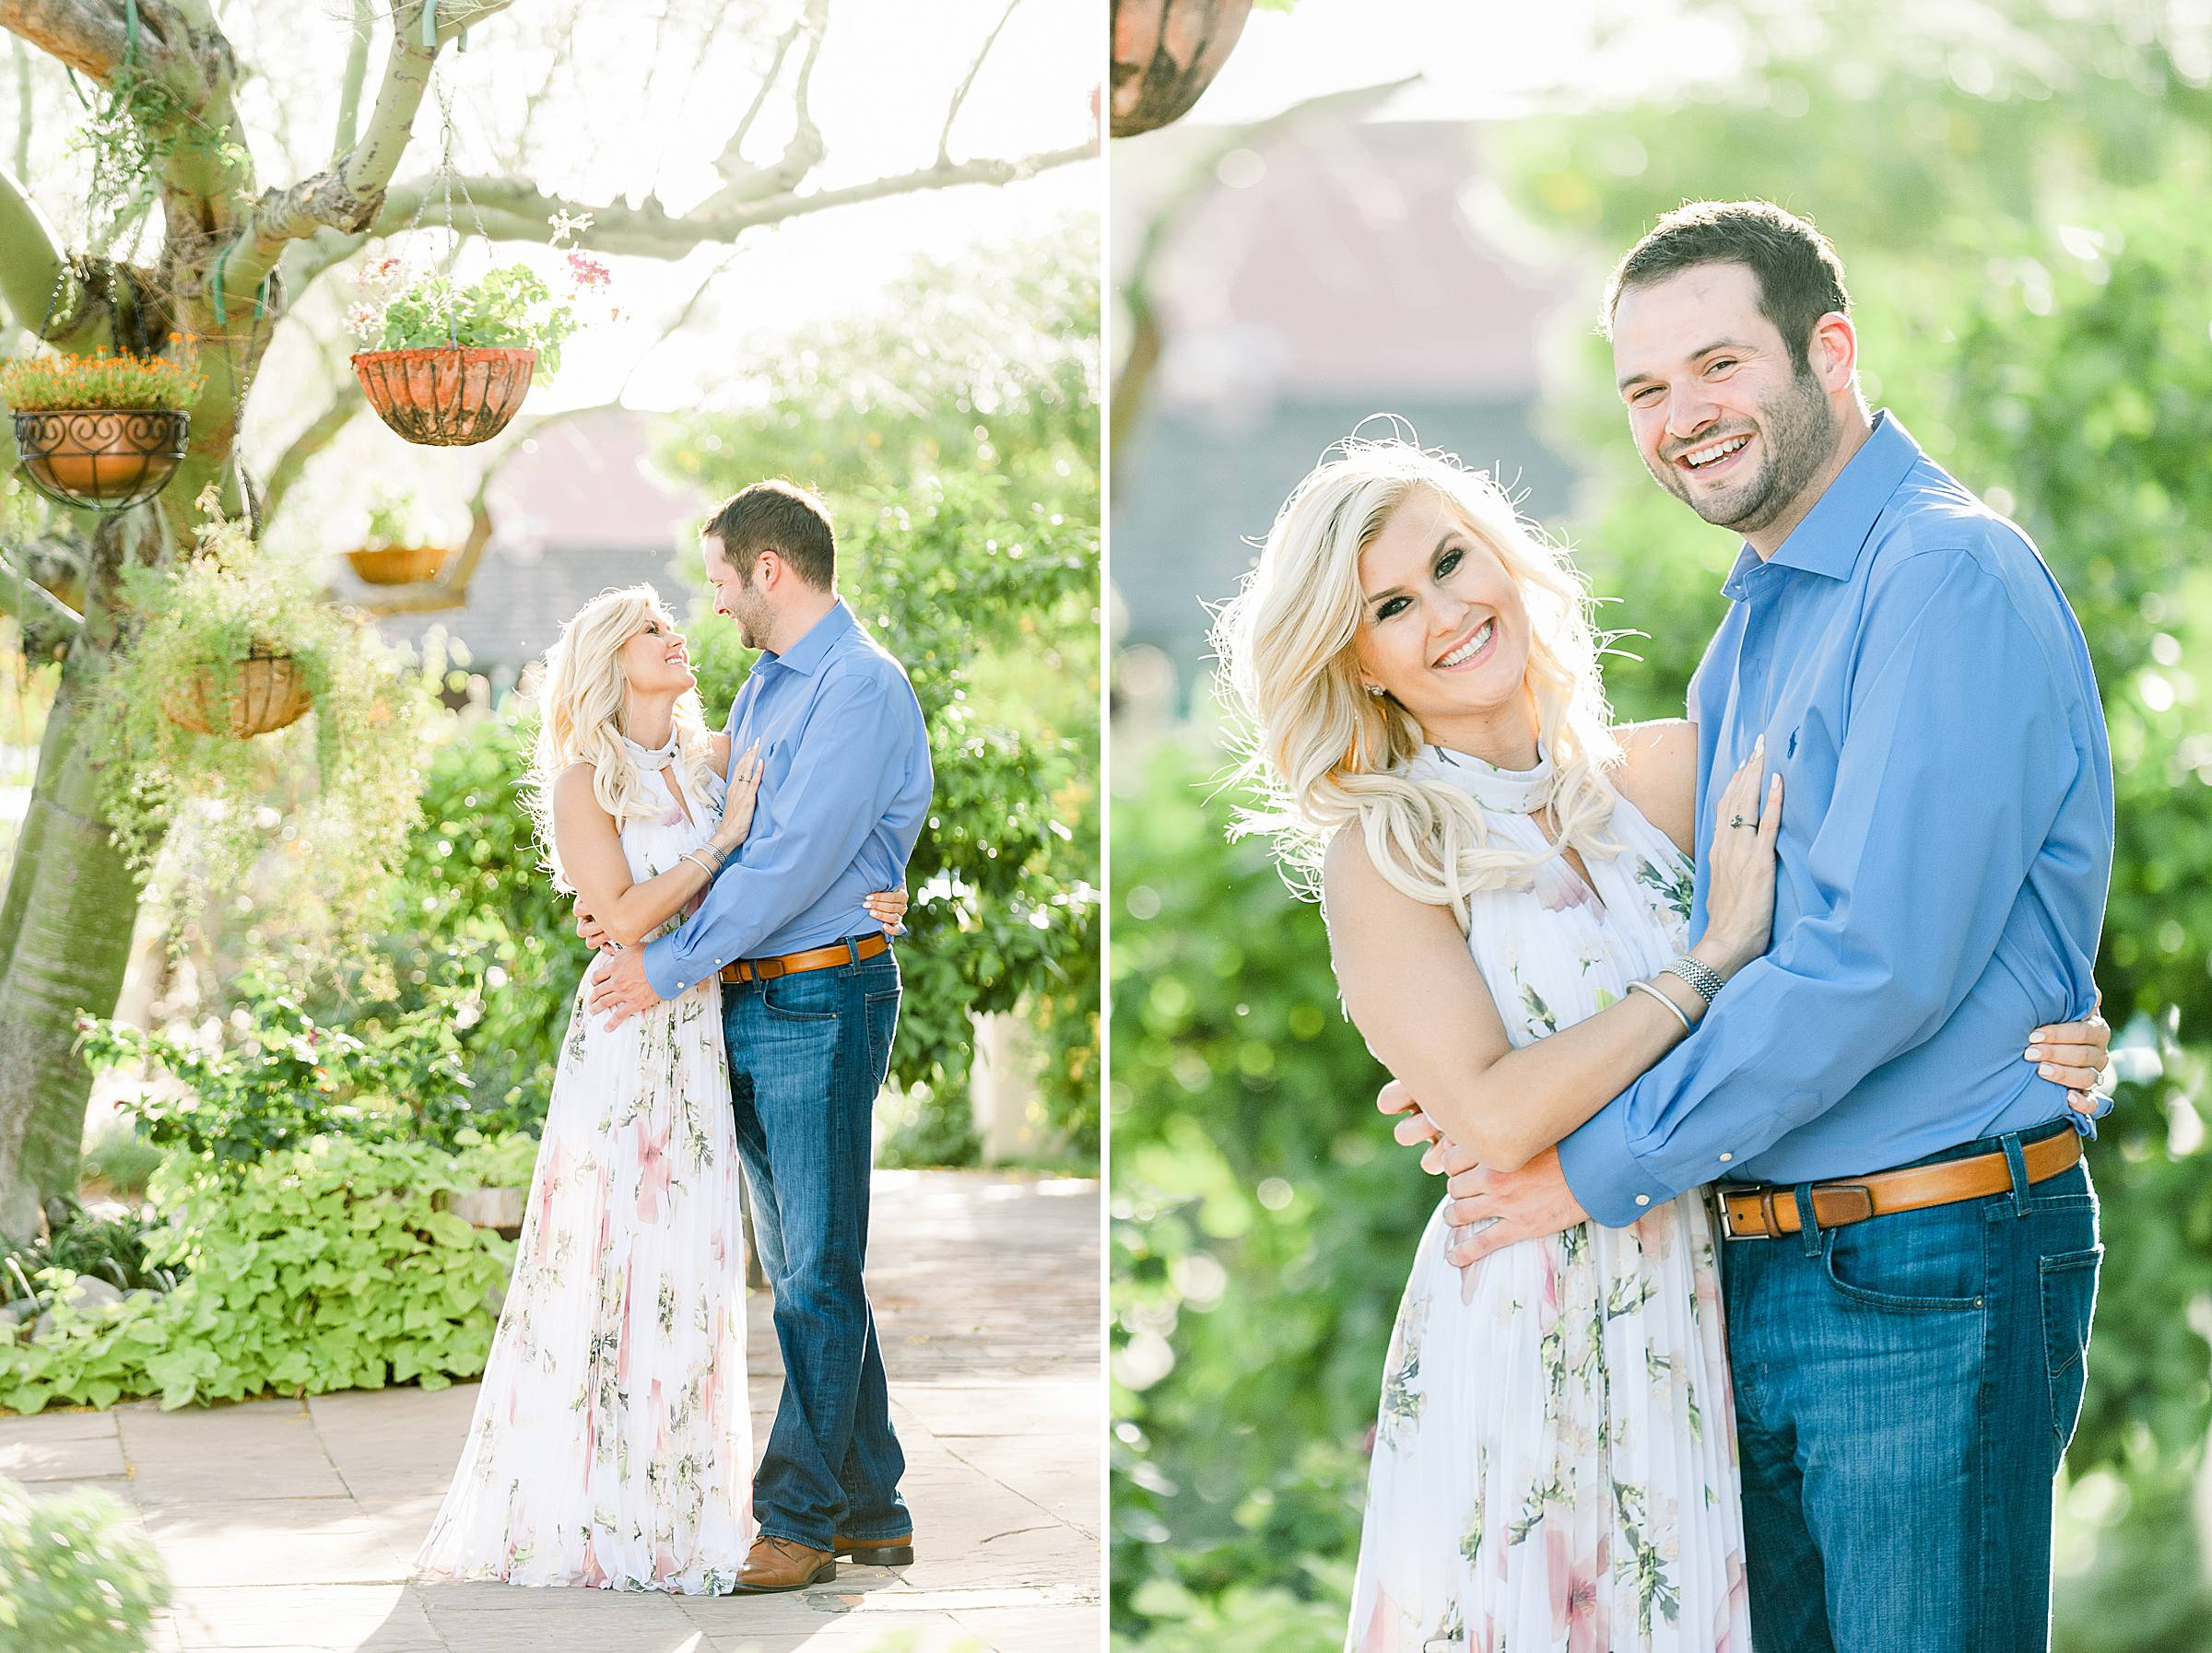 Romantic Old Town Engagement Photoshoot